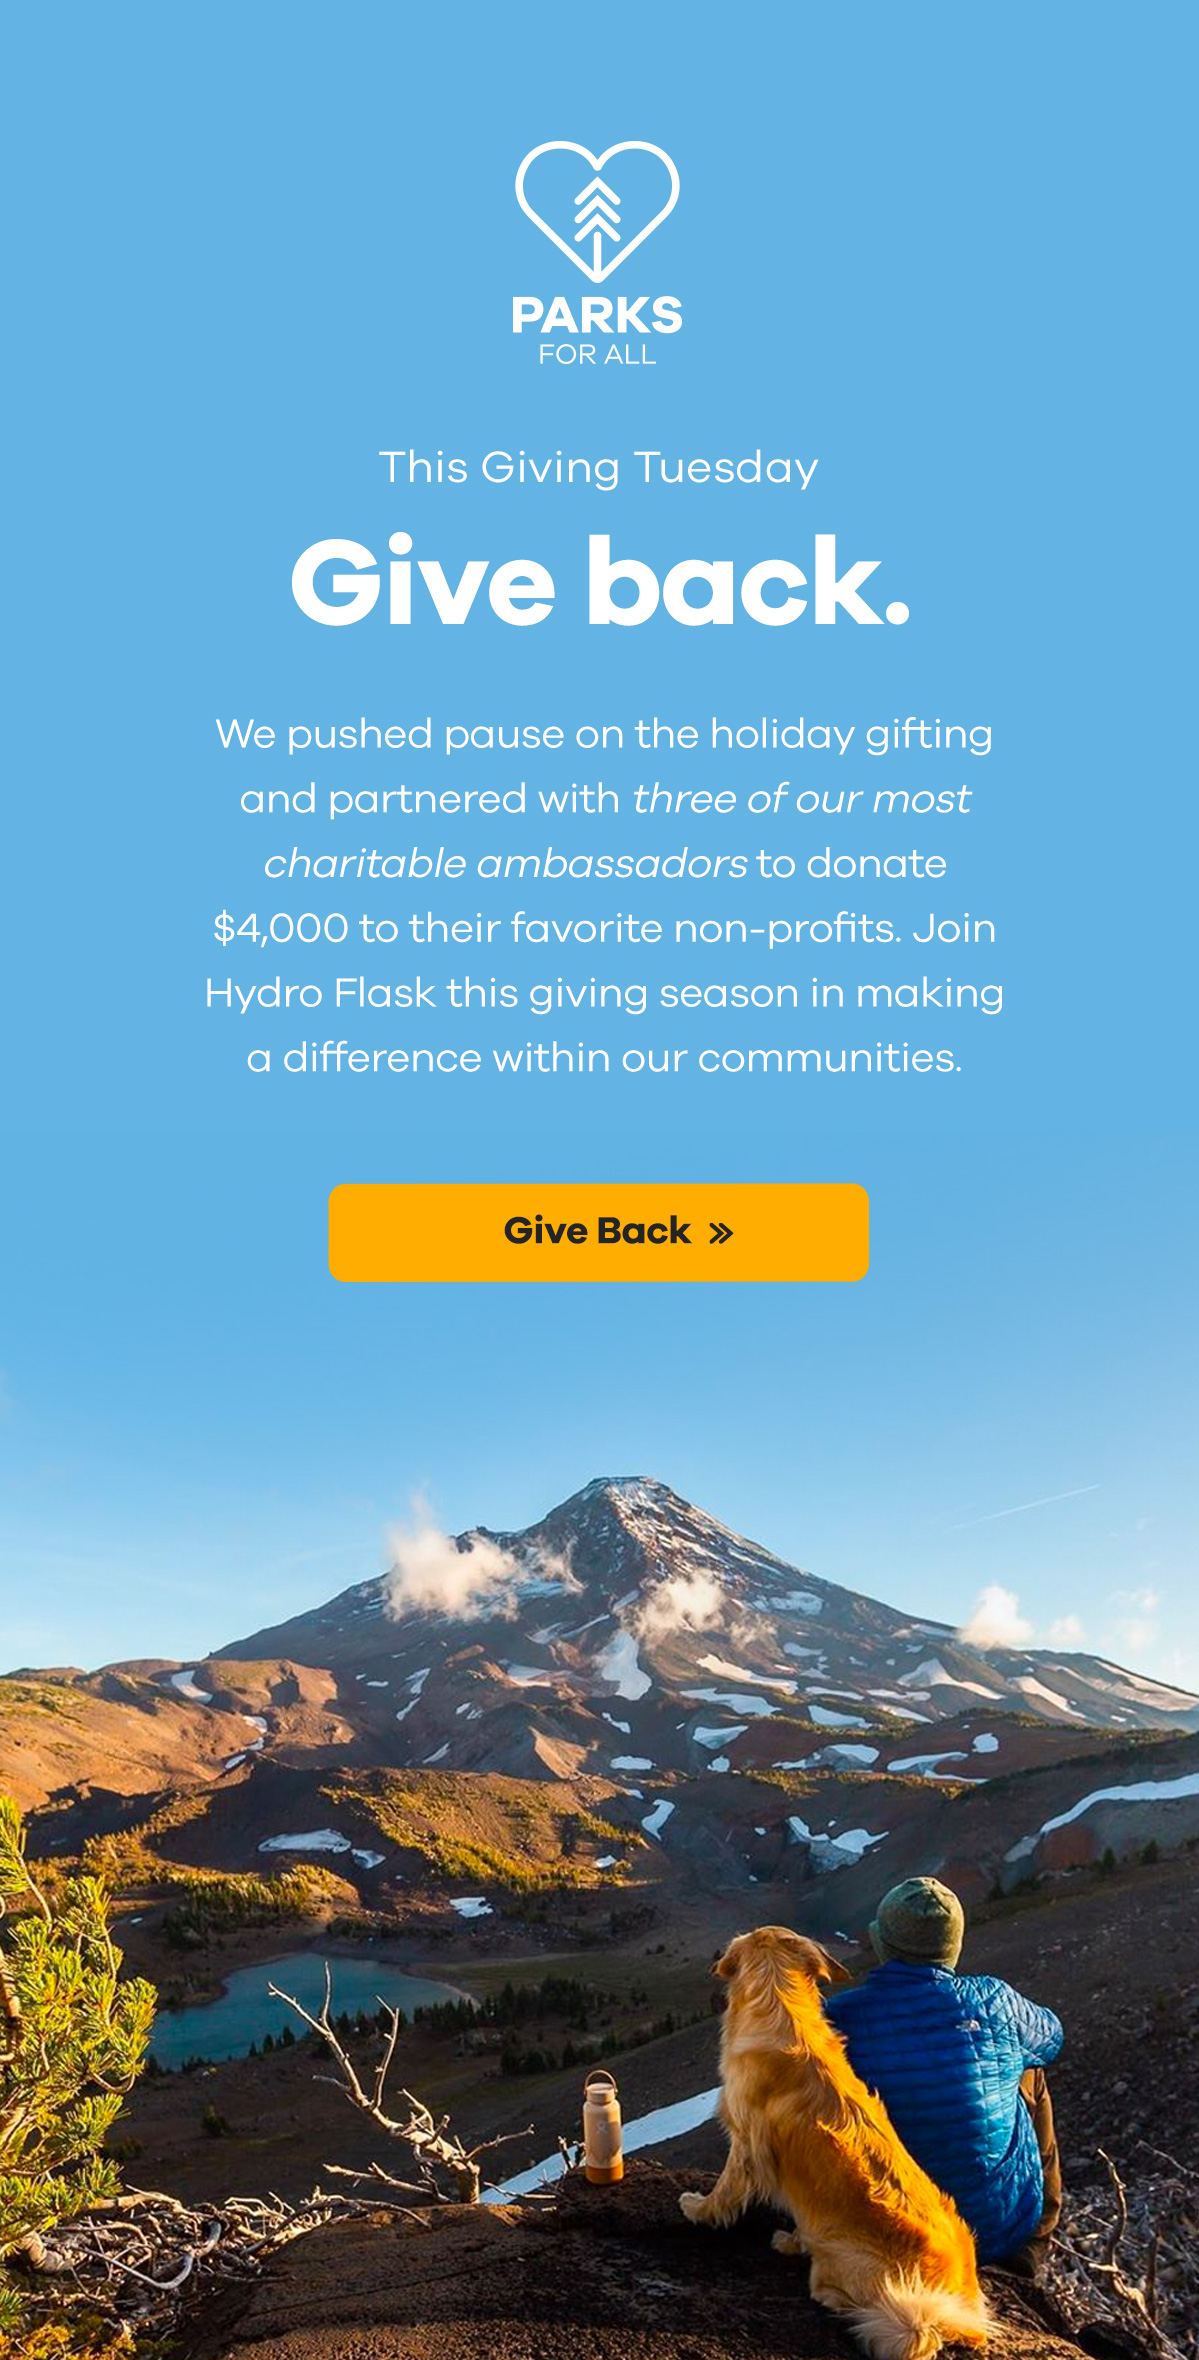 PARKS FOR ALL | This Giving Tuesday Give back. | We pushed pause ont he holiday gifting and partnered with three of our most charitable ambassadors to donate $4,000 to their favorite non-profits. Join Hydro Flask this giving season in making a difference within our communities. | Give Back >>